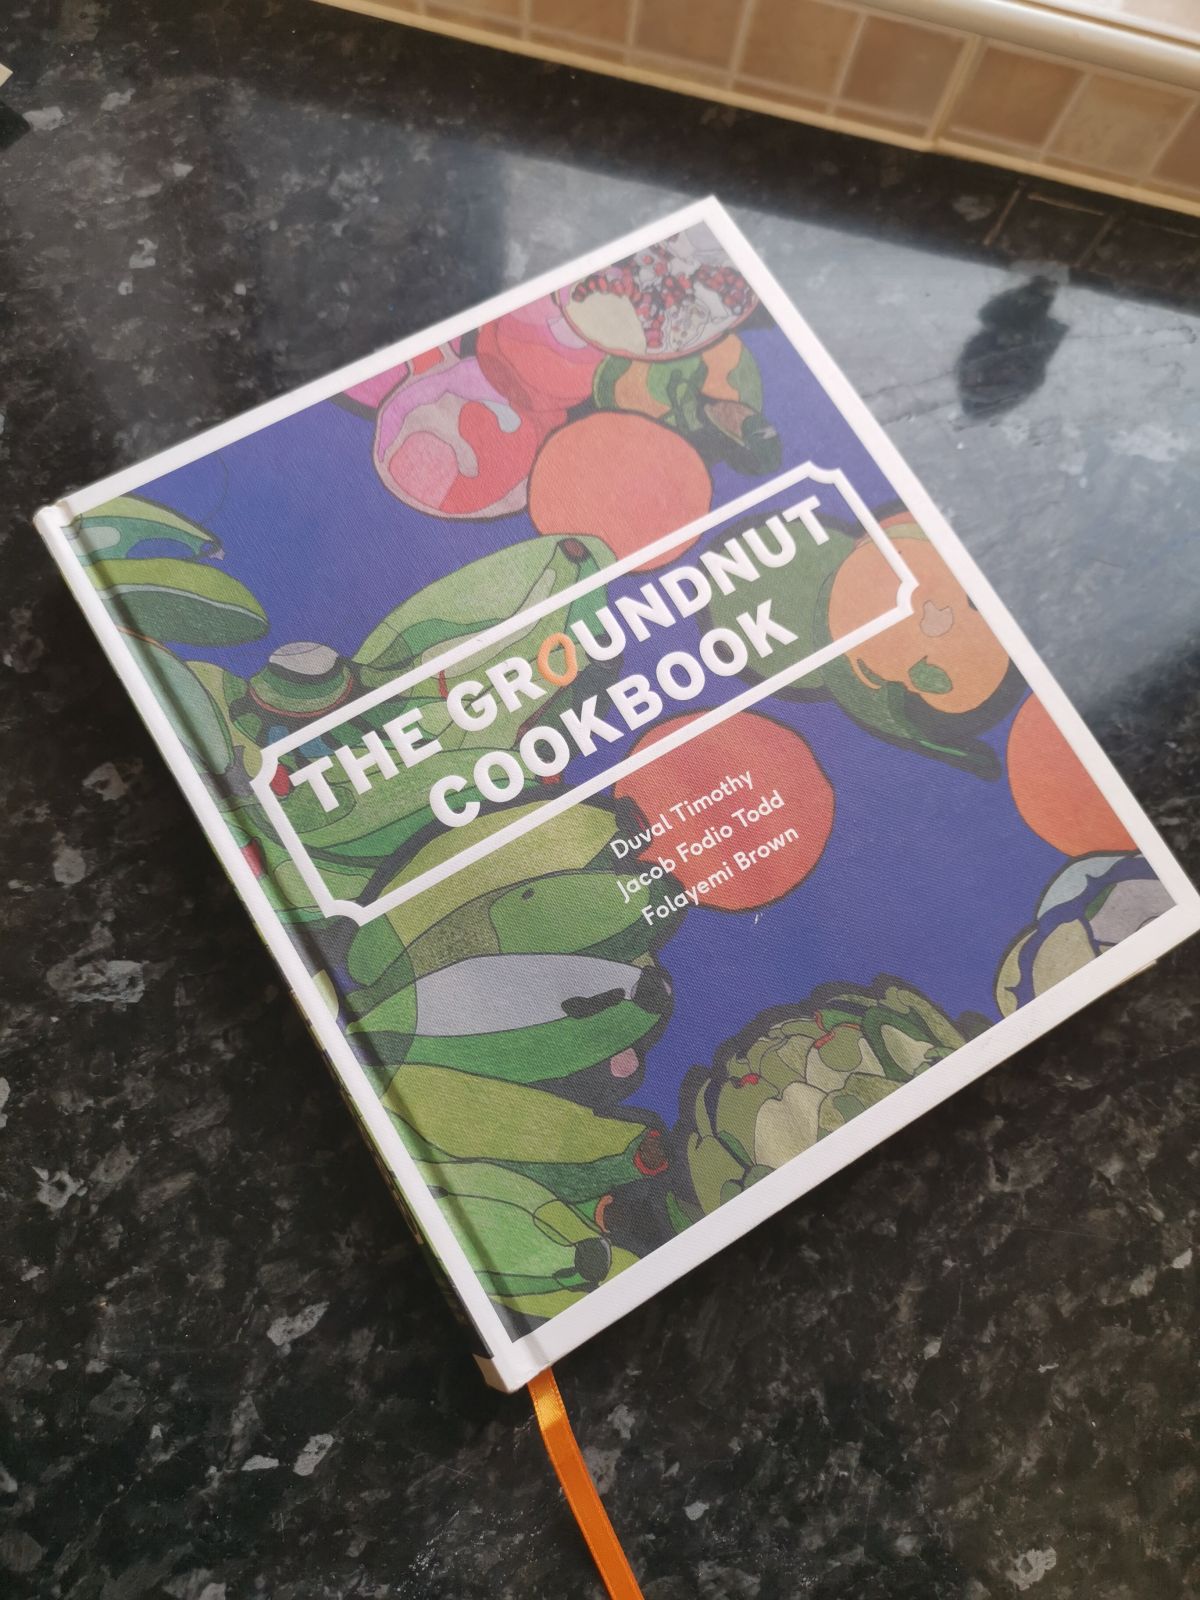 The Groundnut Cookbook: The Supper club that brought African food to UK mouths